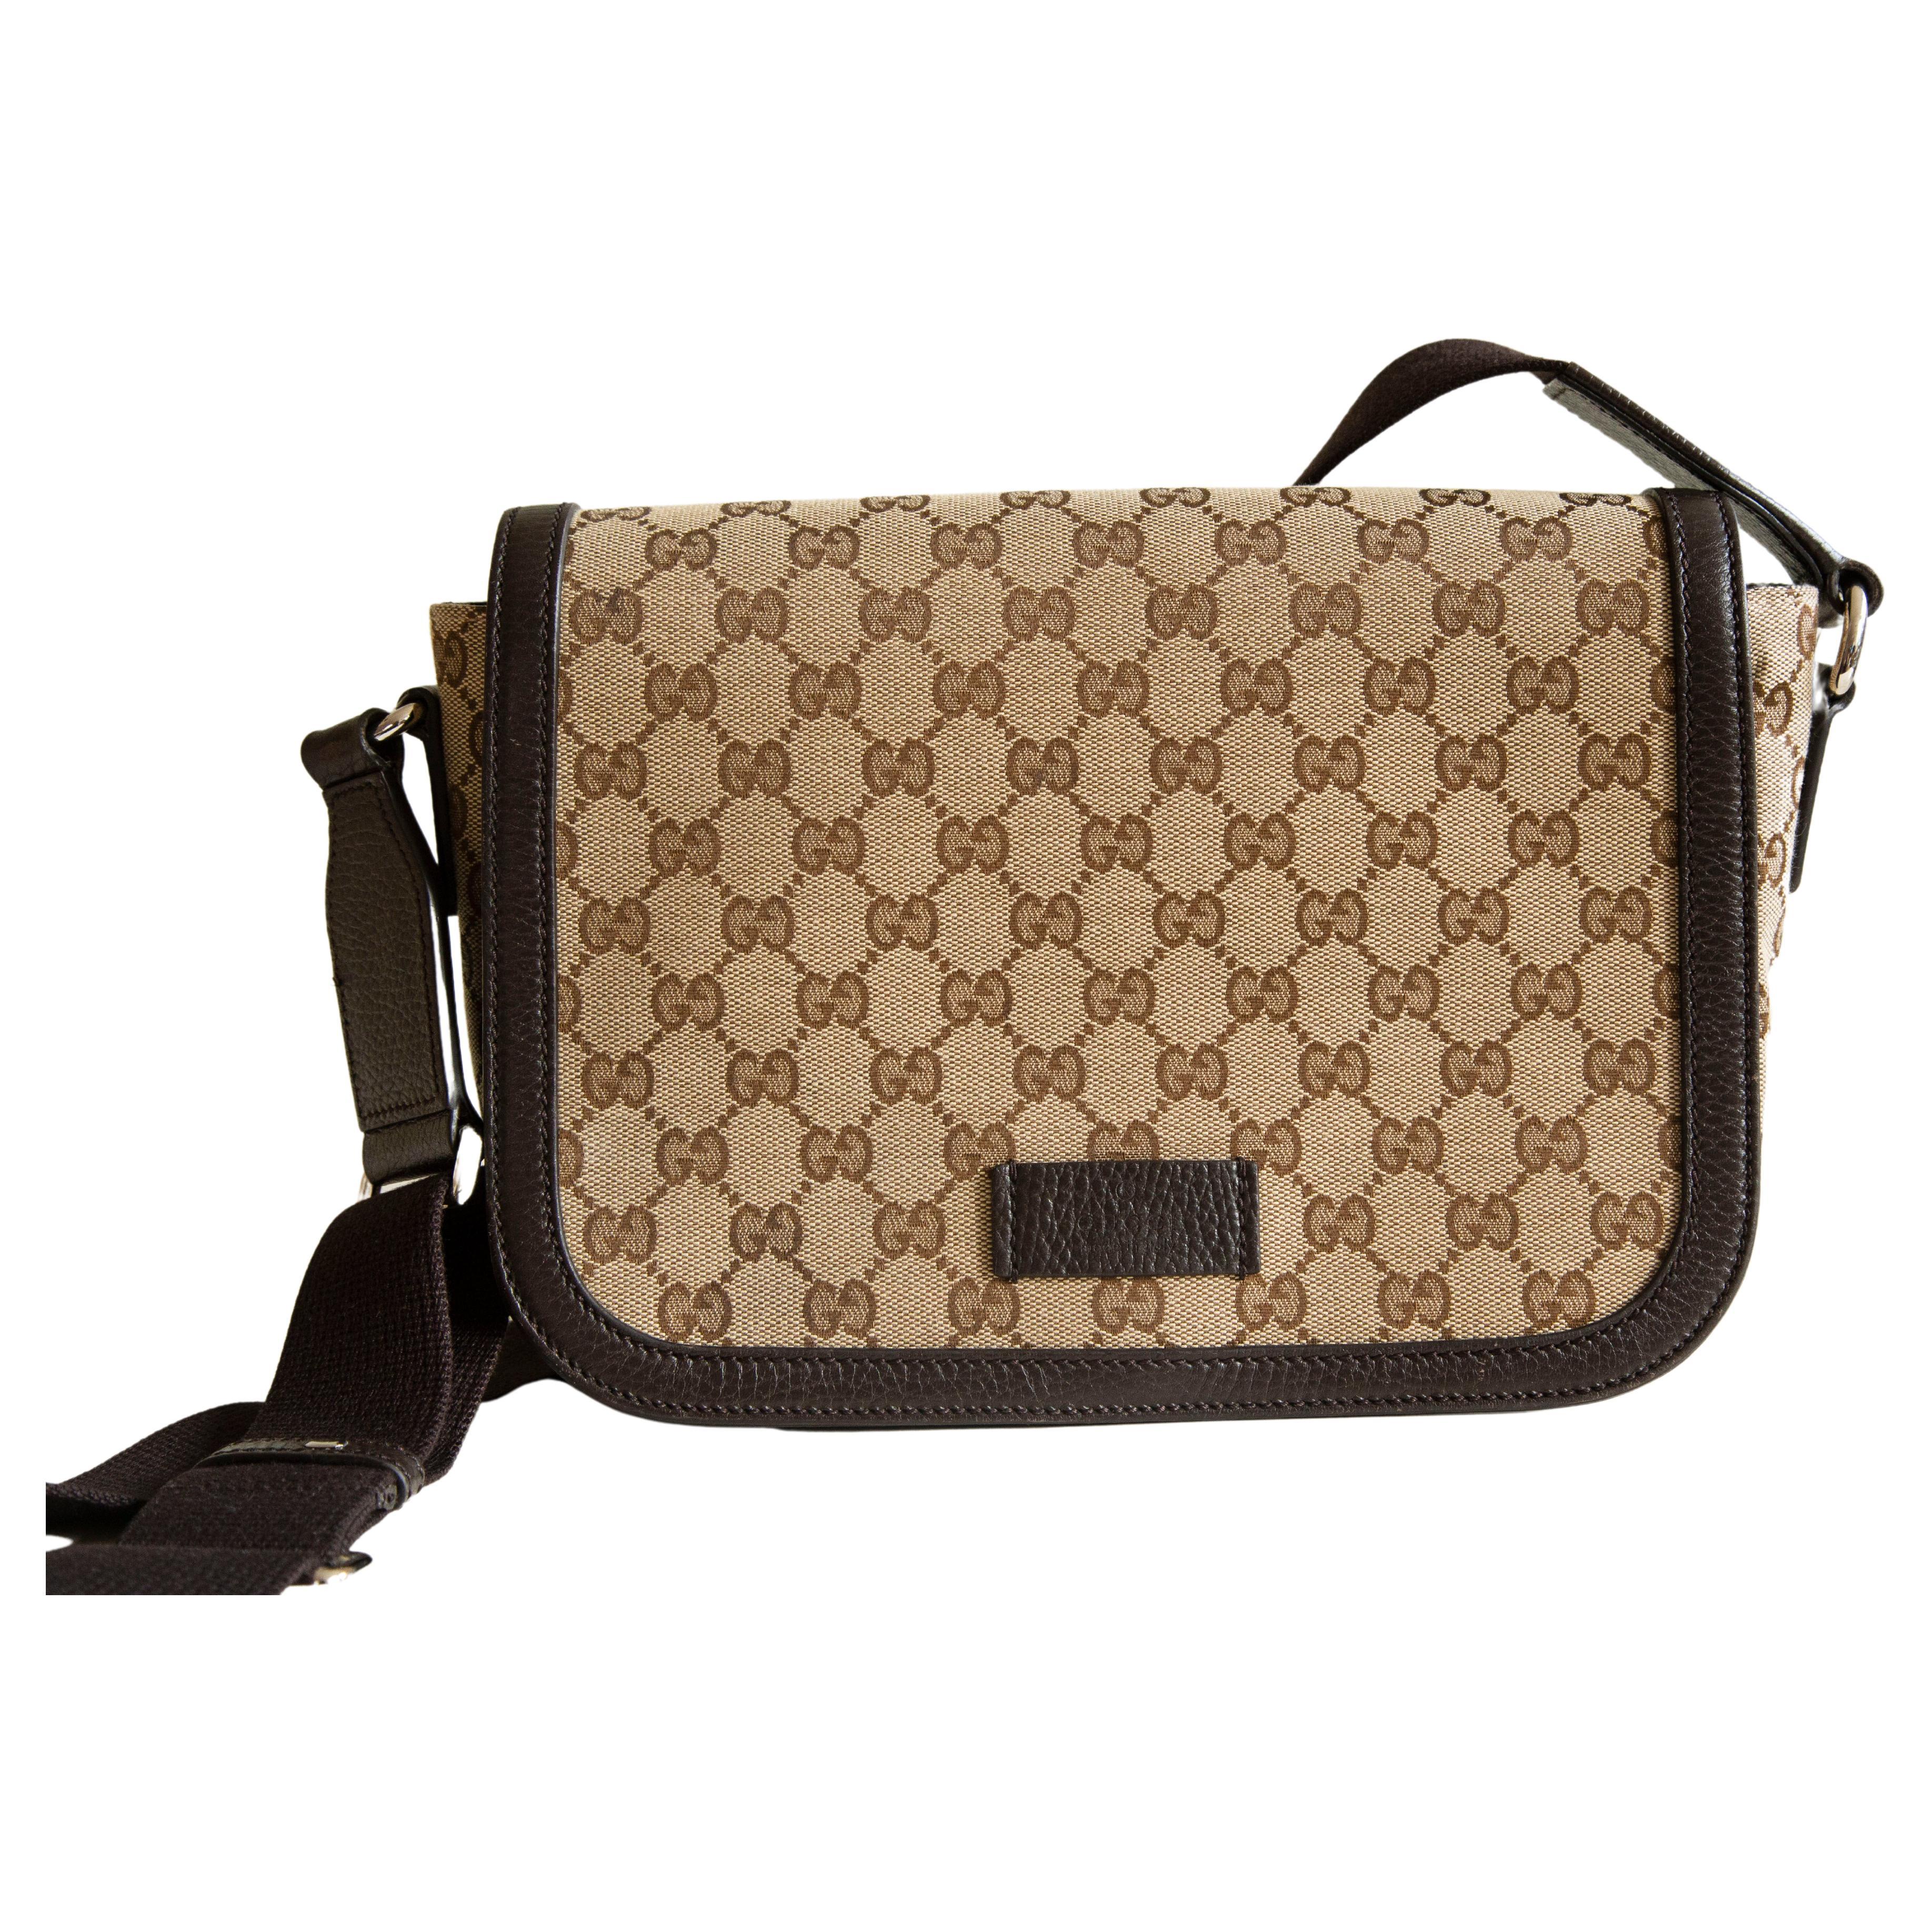 Gucci in GG Brown and Beige Canvas Messenger Bag For Sale